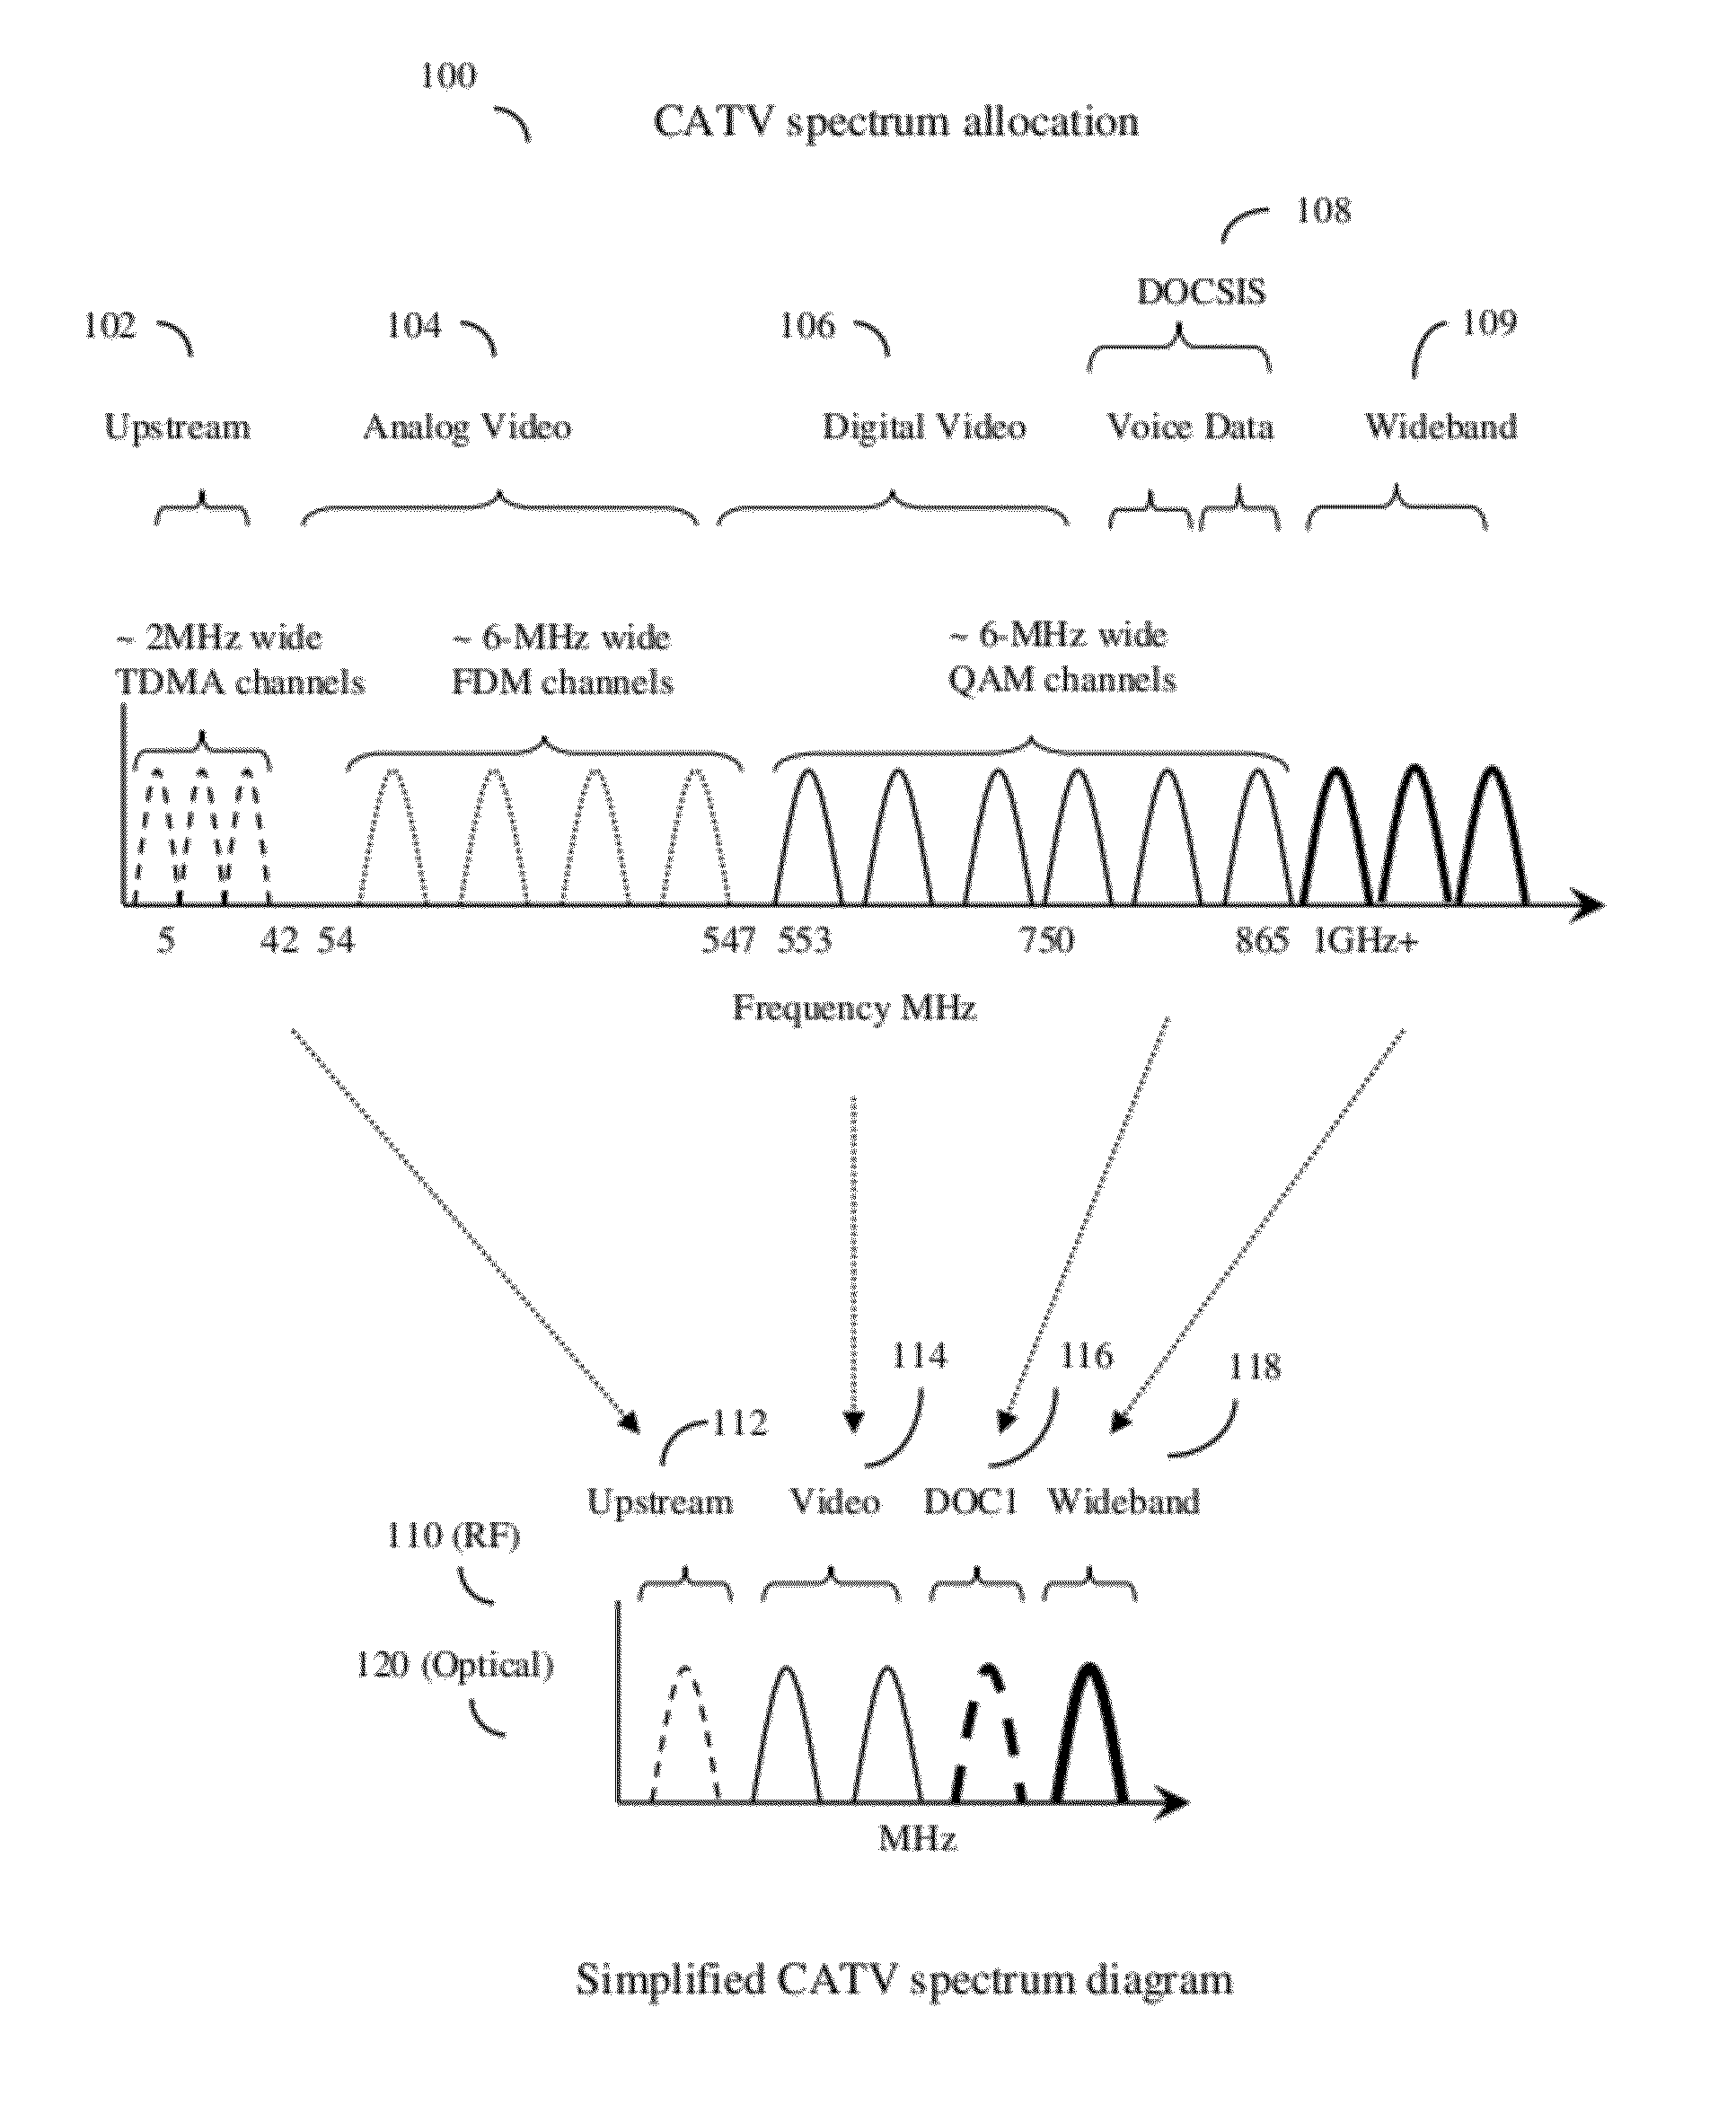 Hfc cable system with wideband communications pathway and coax domain nodes